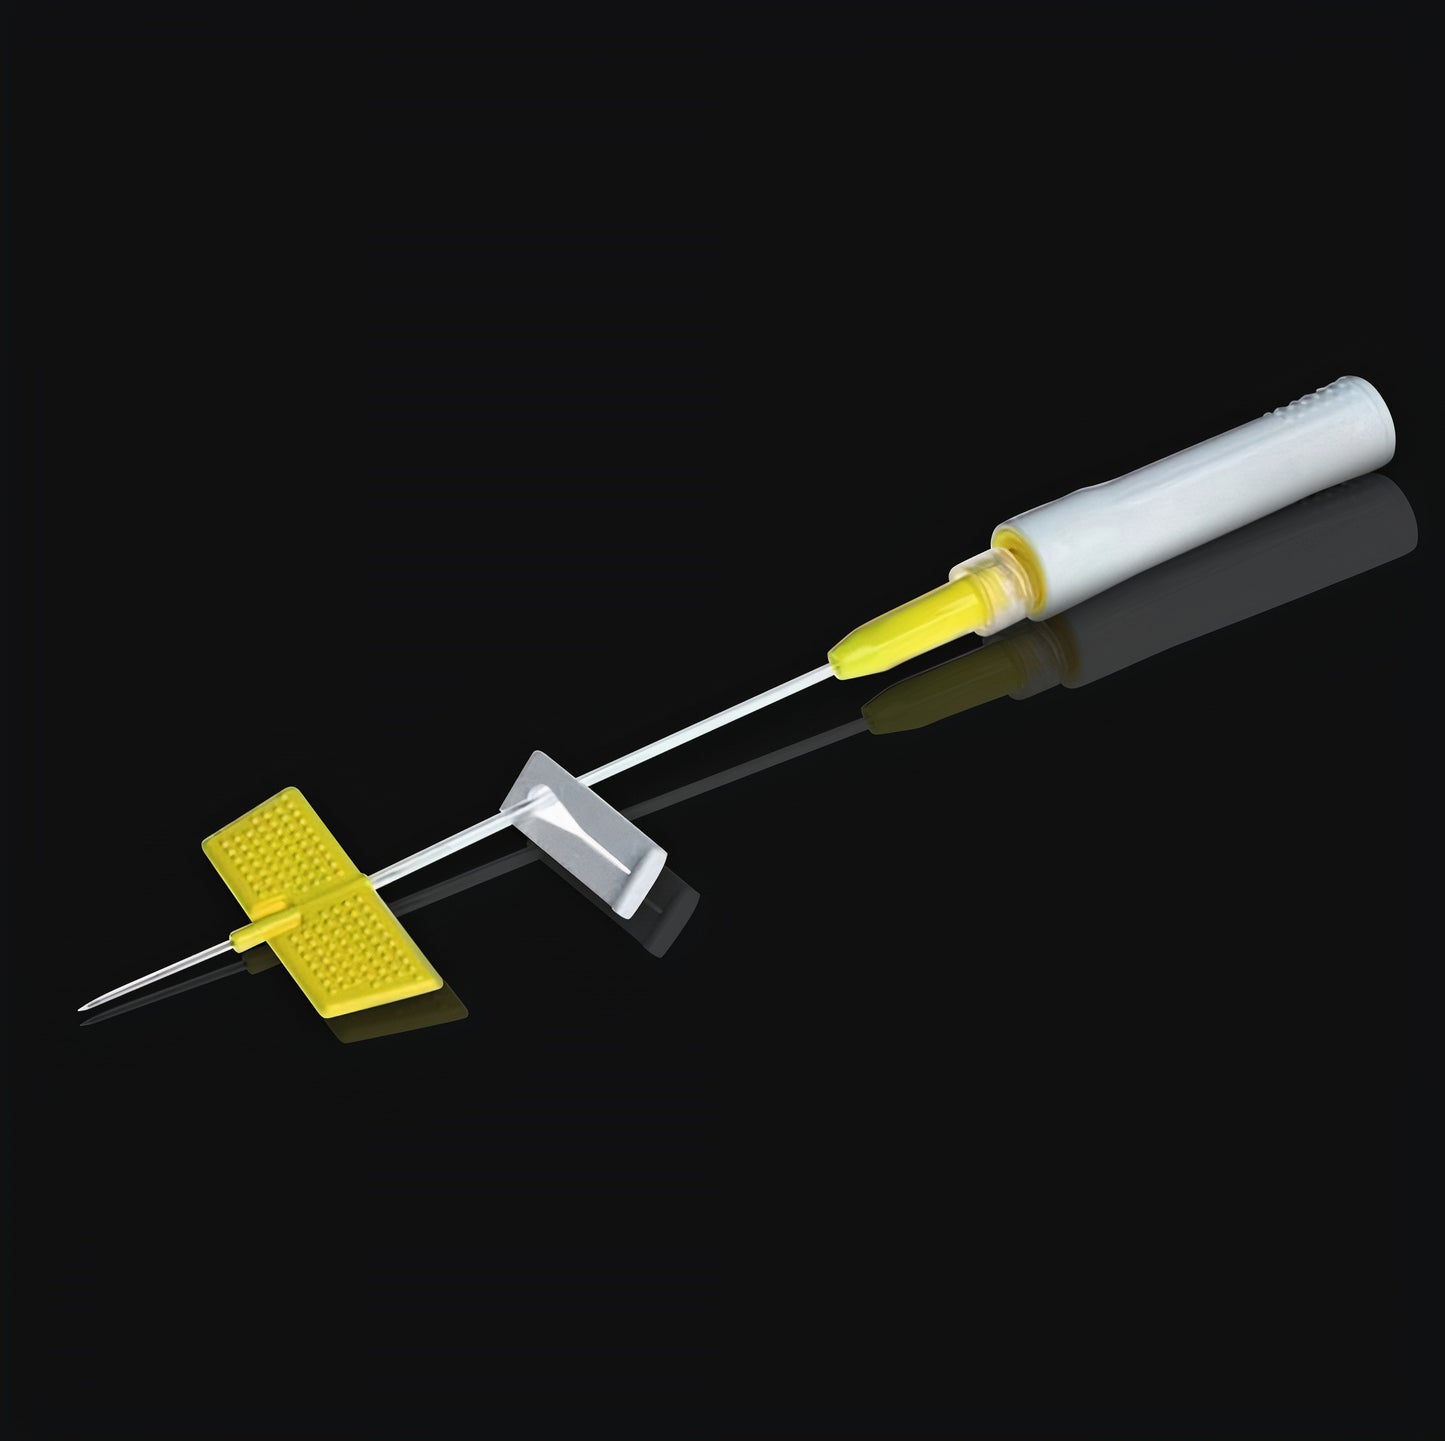 BD Saf-T-Intima™ Closed IV Catheter System 20 G x 1.00 in. (1.1 mm x 25 mm)  with BD Vialon™ Catheter Material, sterile, single use - 383336